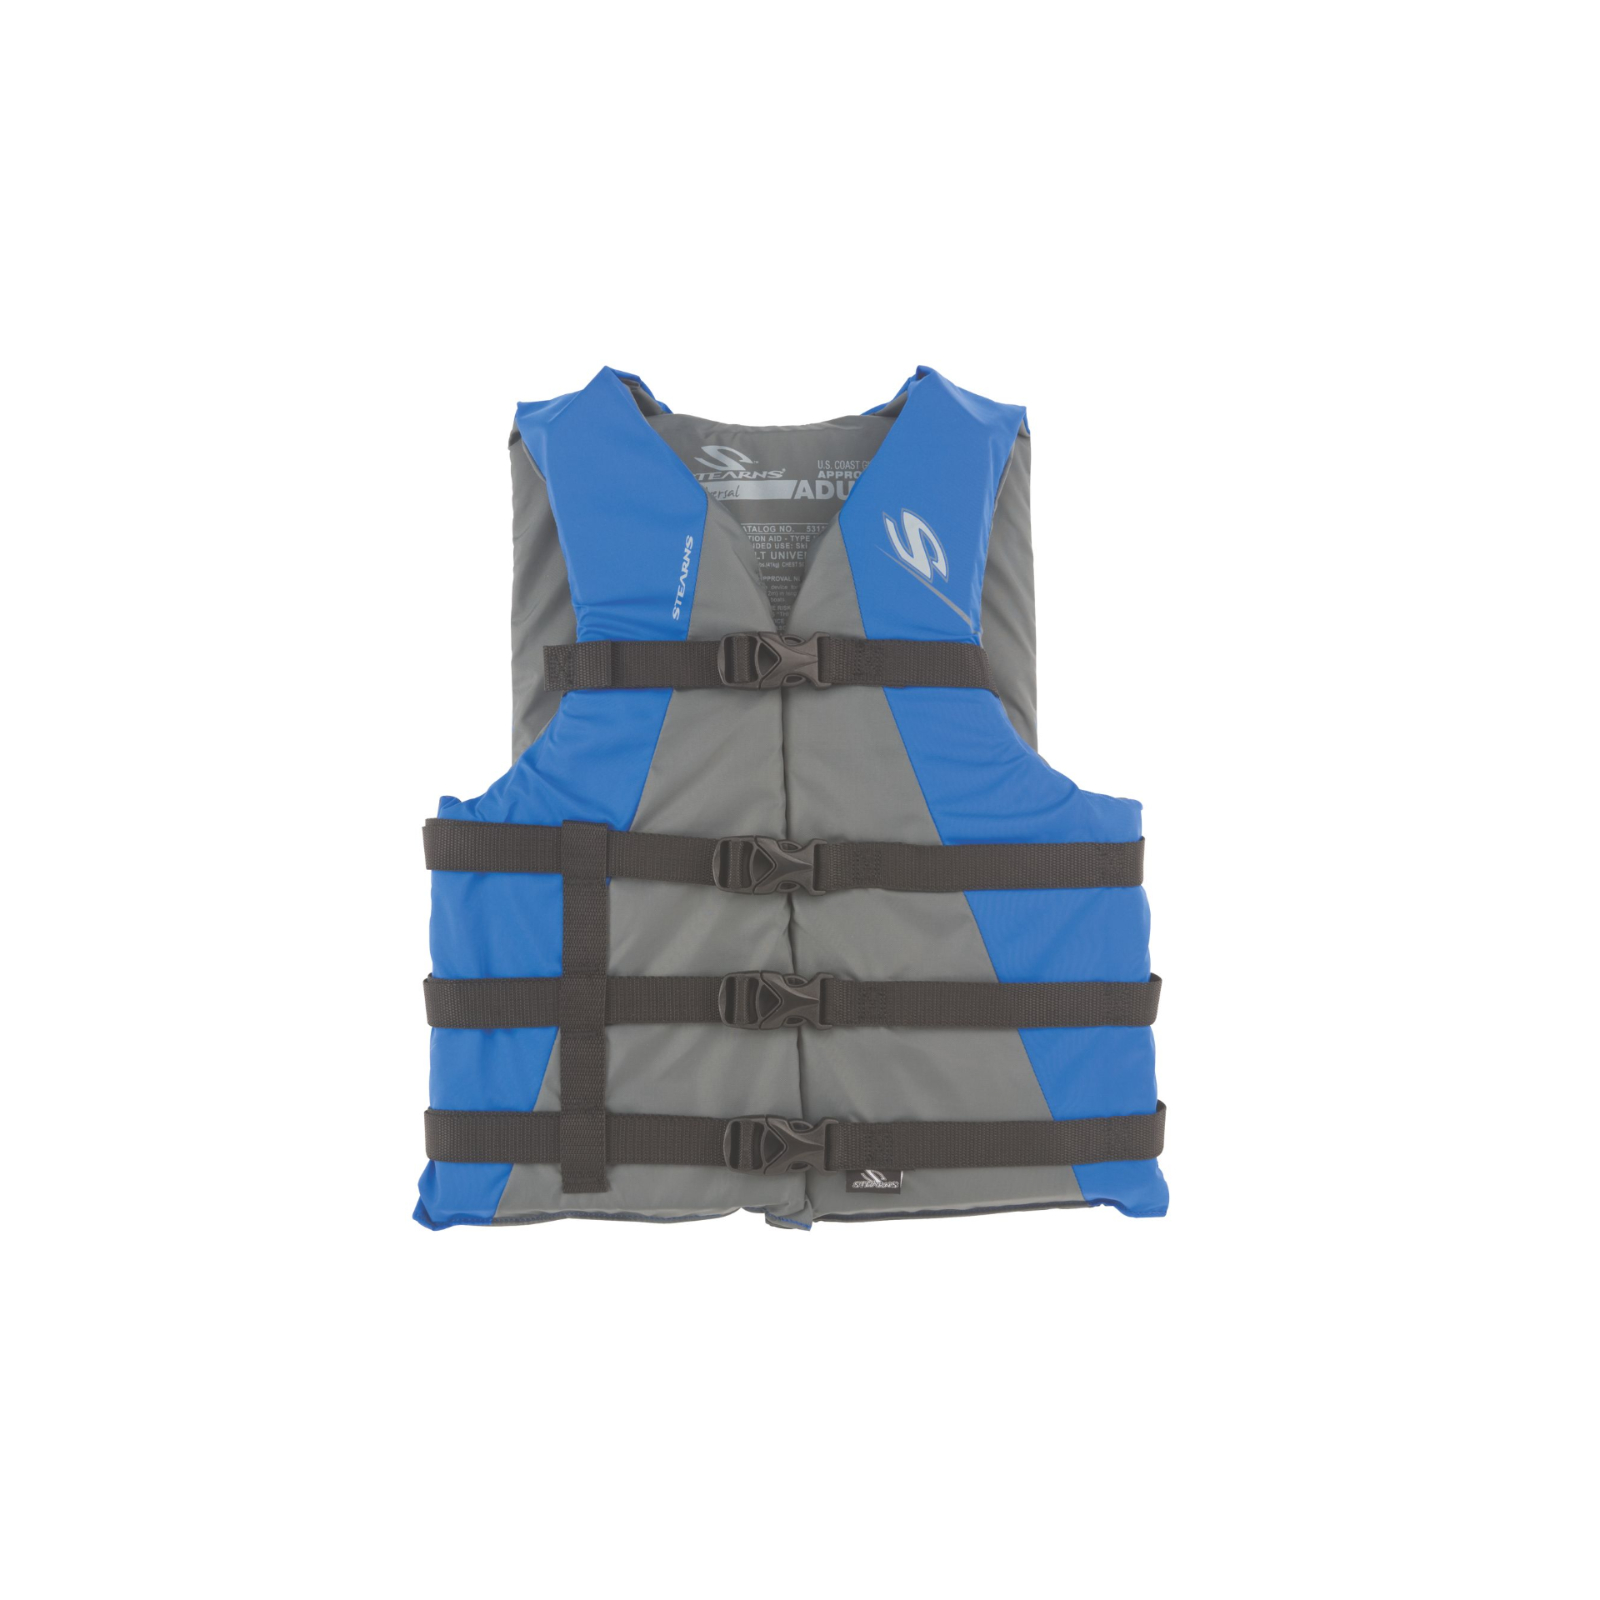 Stearns PFD 5311 Watersport Adult Classic Life Vest Blue